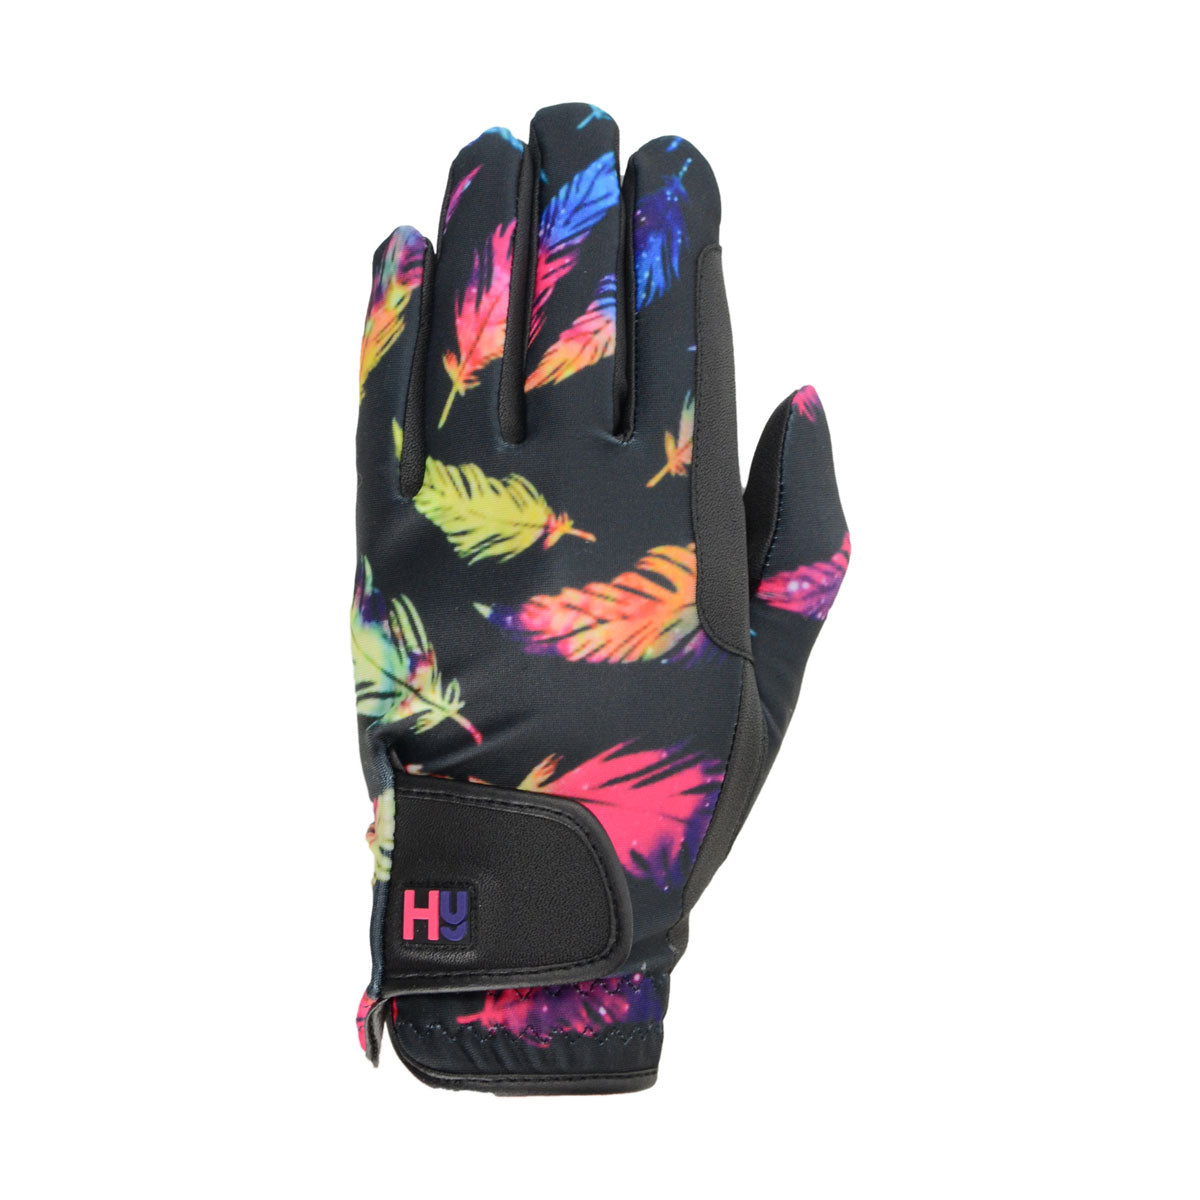 HY Lightweight Printed Riding Gloves